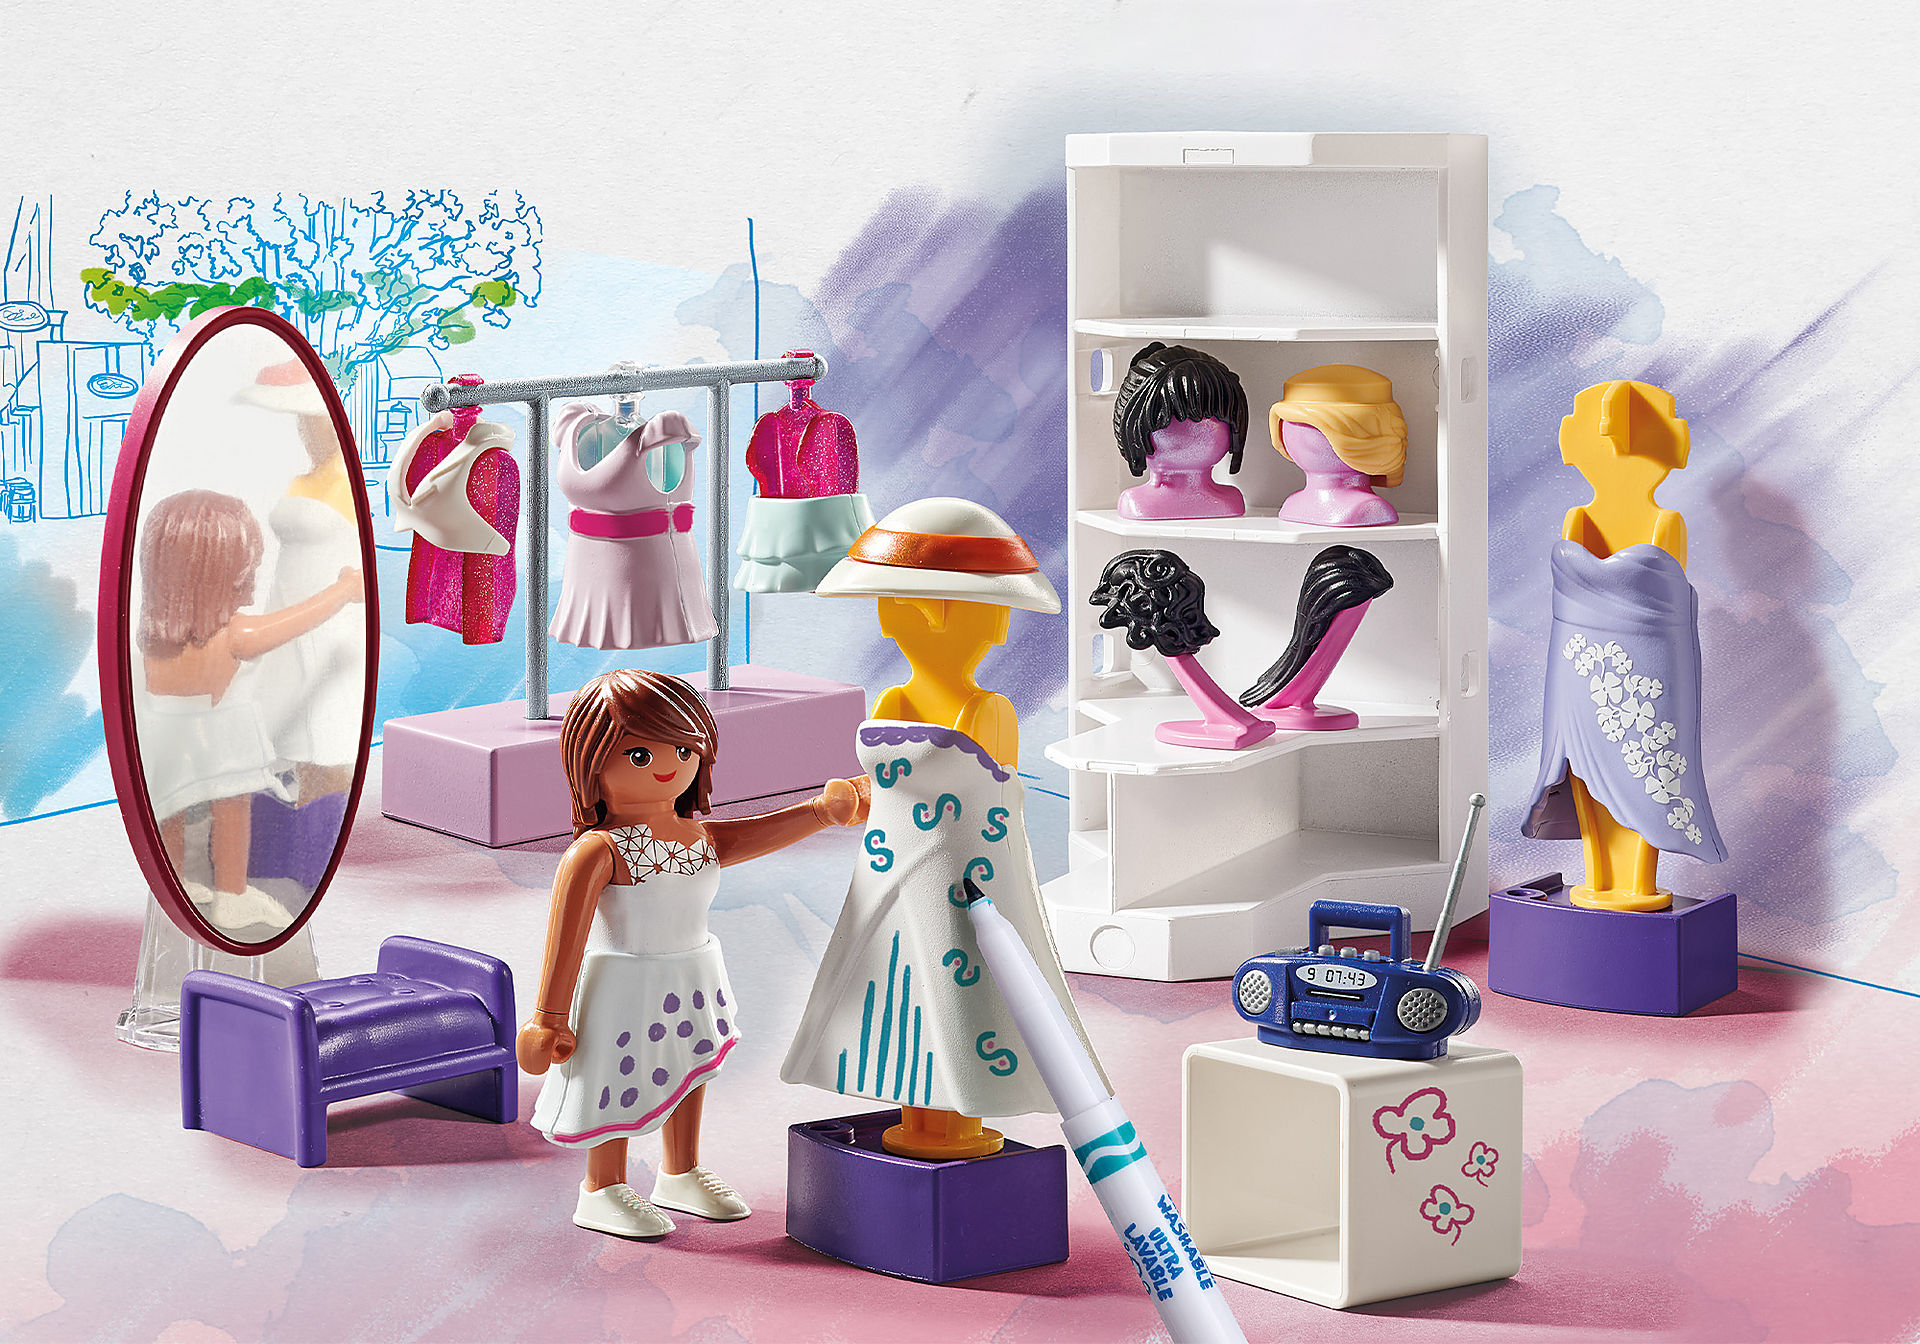 71373 PLAYMOBIL Color: Dressing Room zoom image1